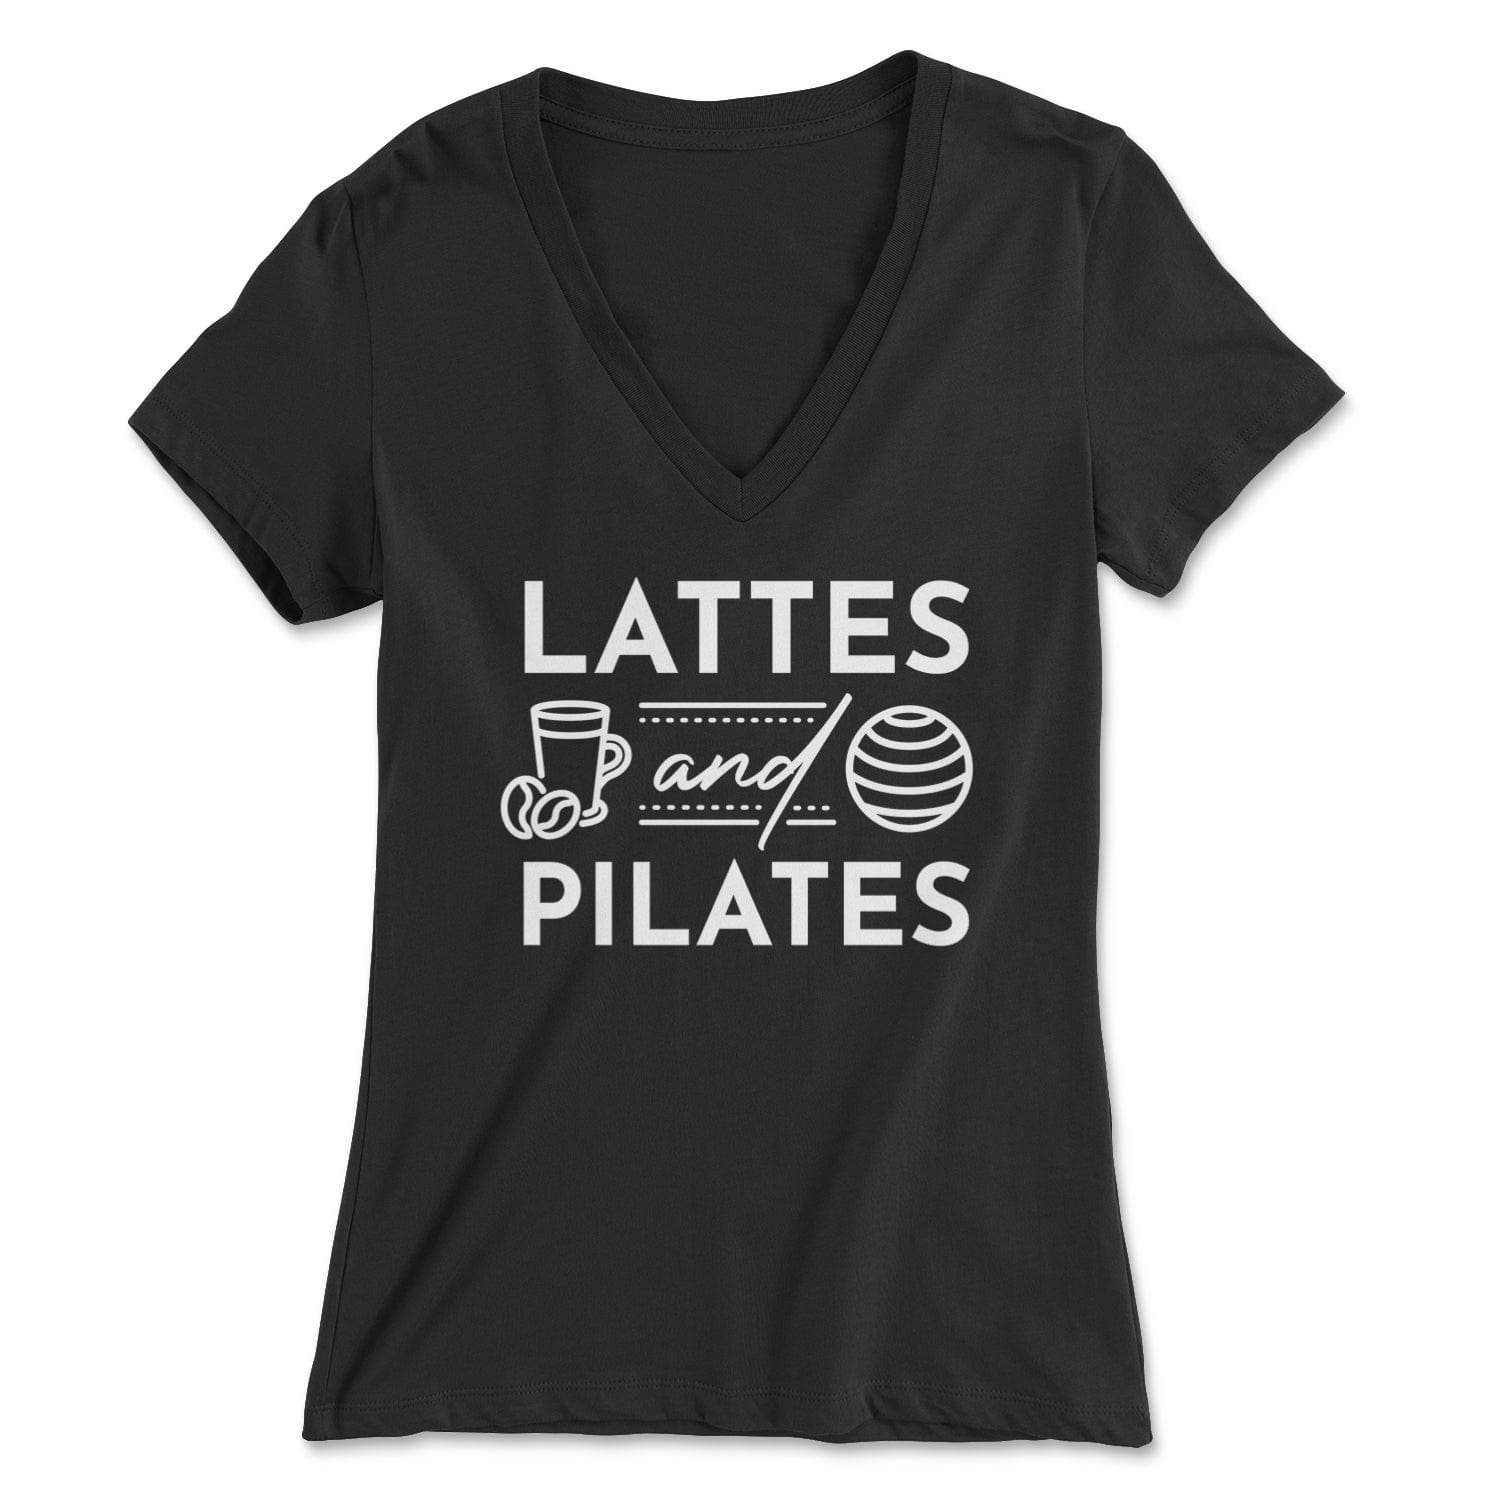 "Lattes and Pilates" - Women's V-Neck Tee Skyba Print Material